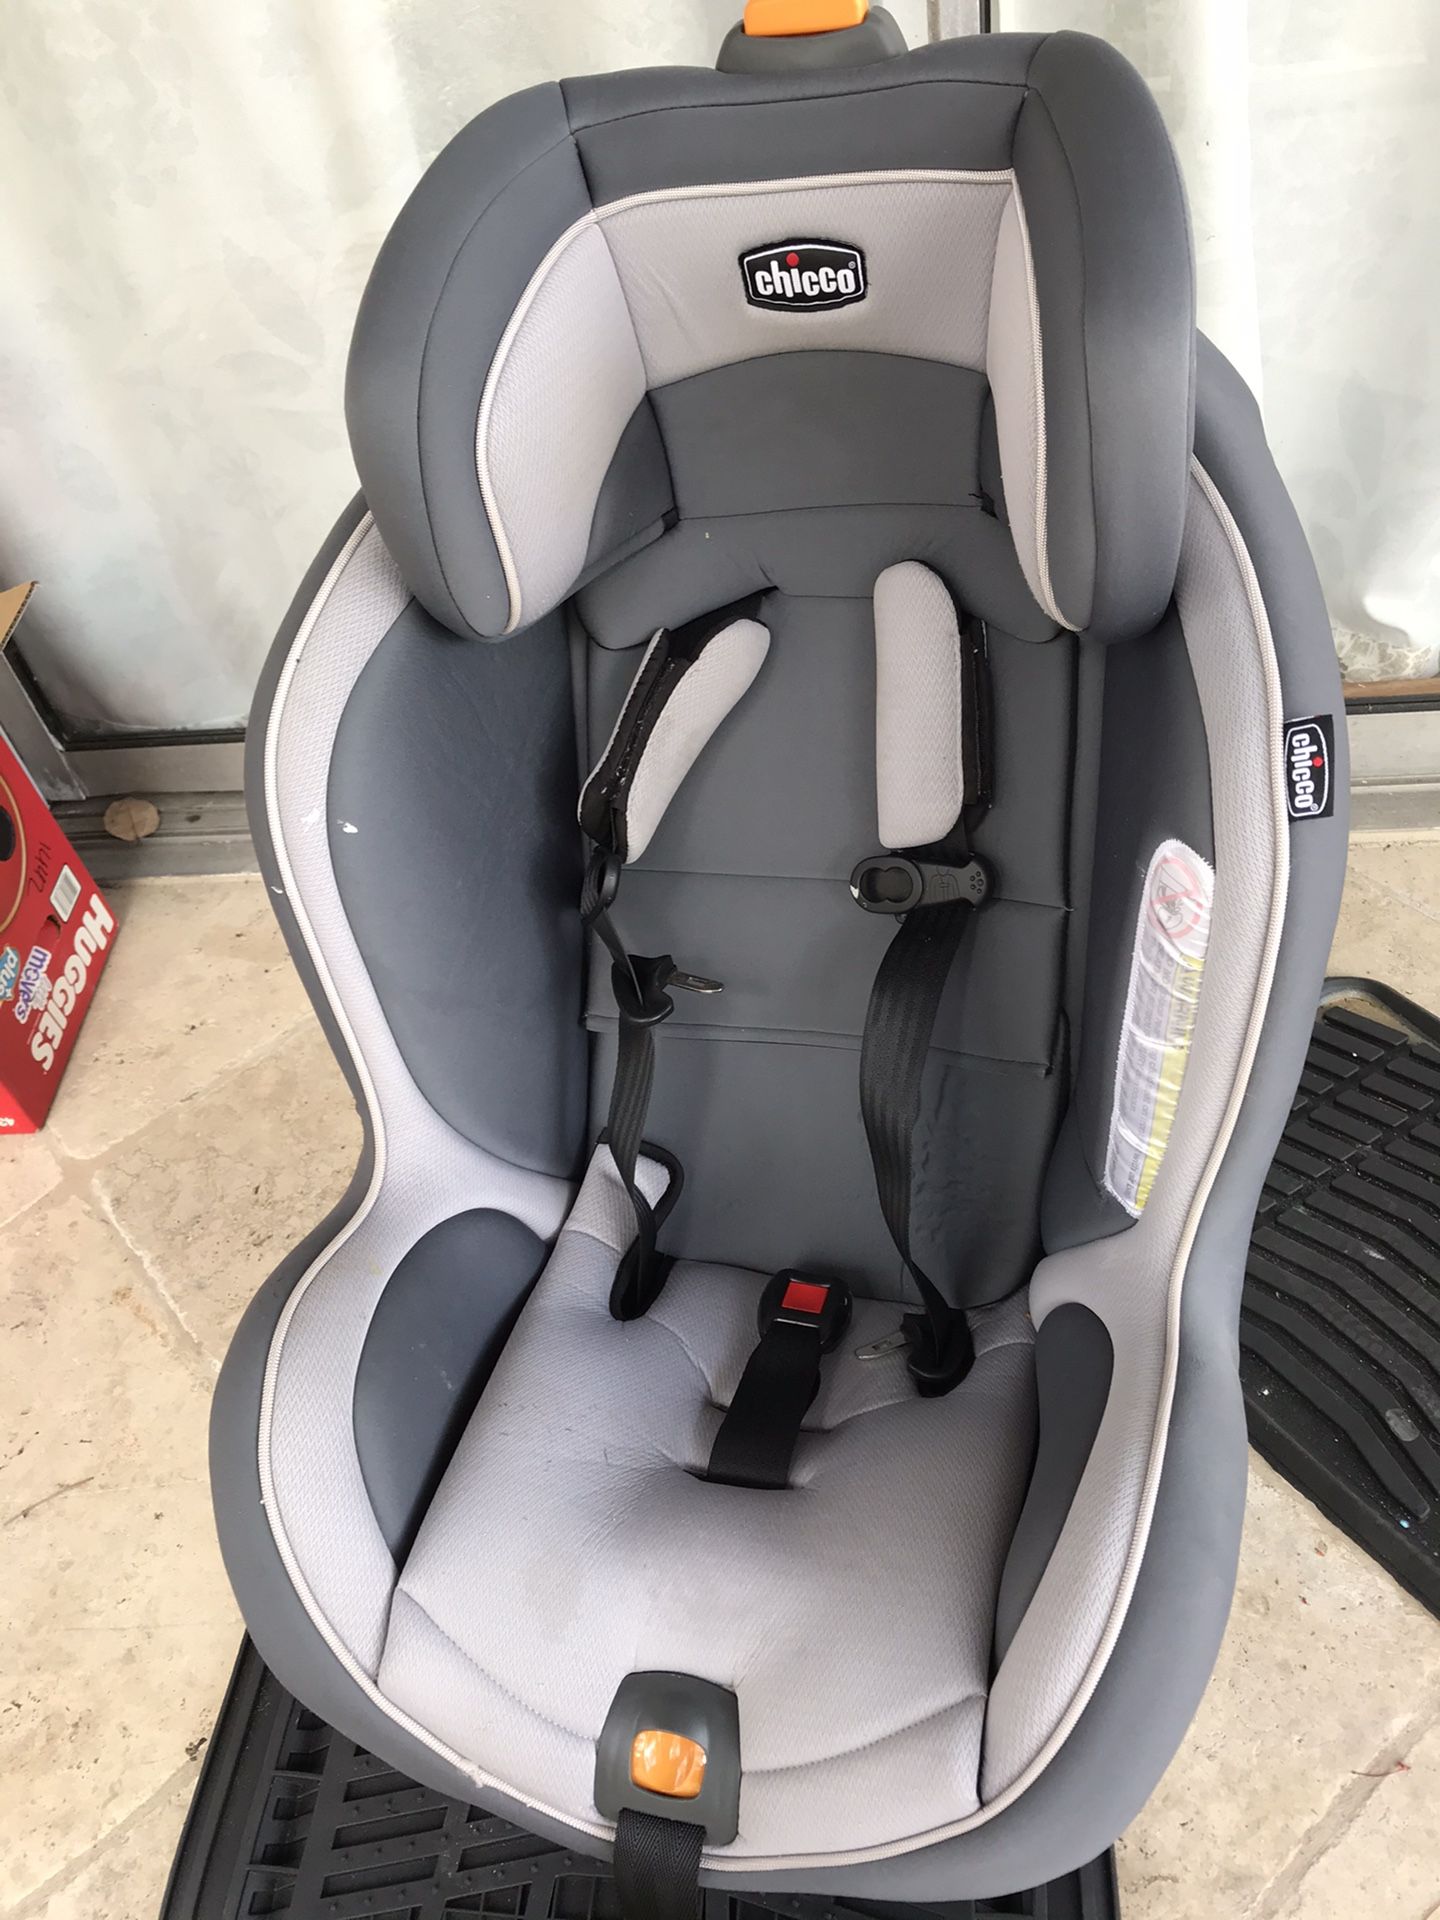 Chicco Brand Car Seat